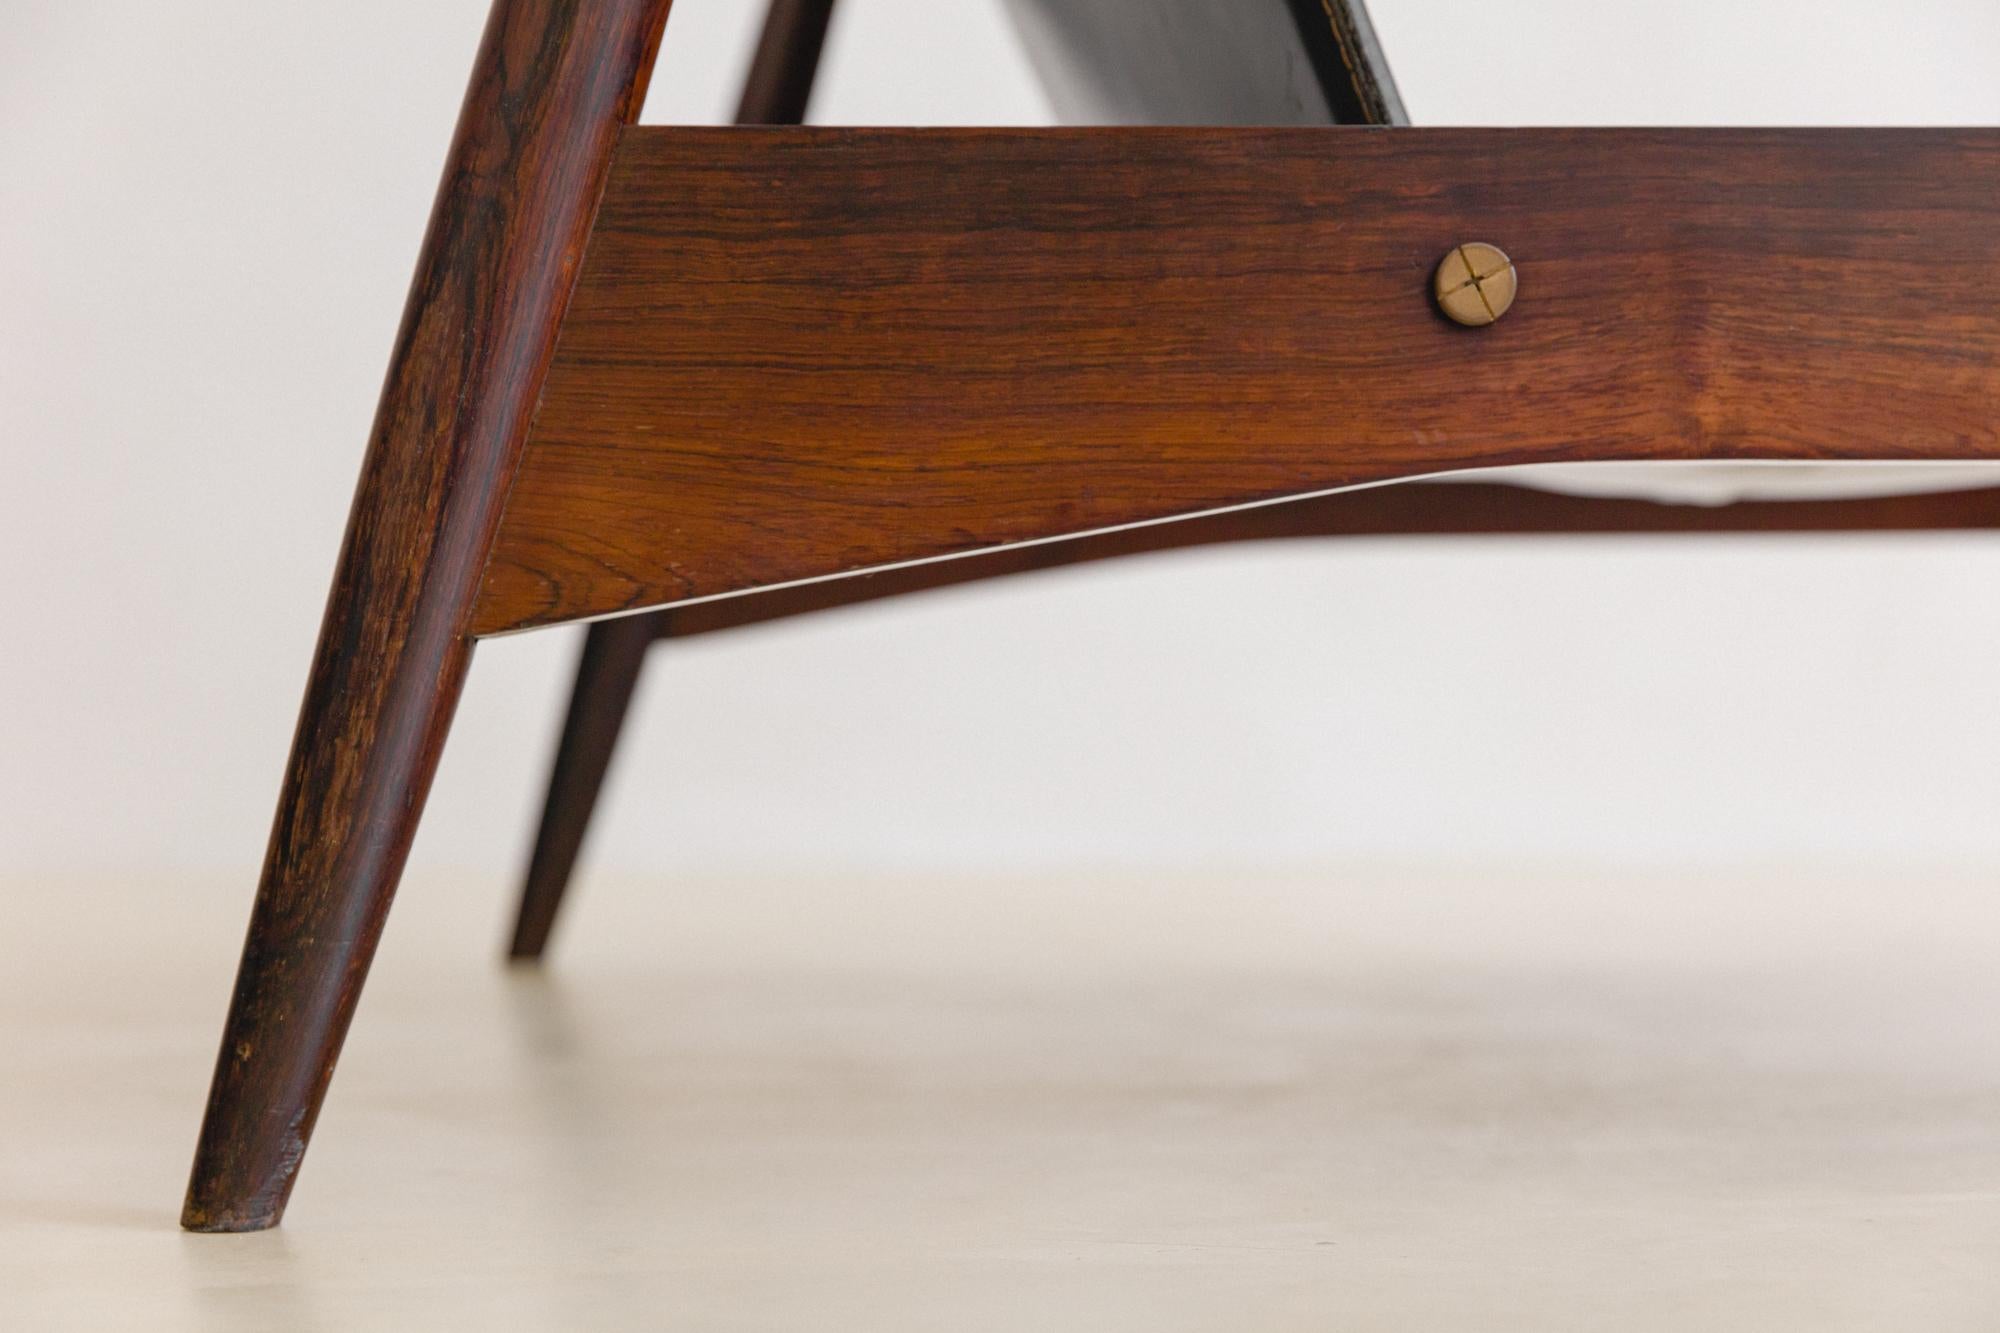 Solid Rosewood Armchair by Unknown Designer, Brazilian Midcentury Design, 1960s For Sale 7